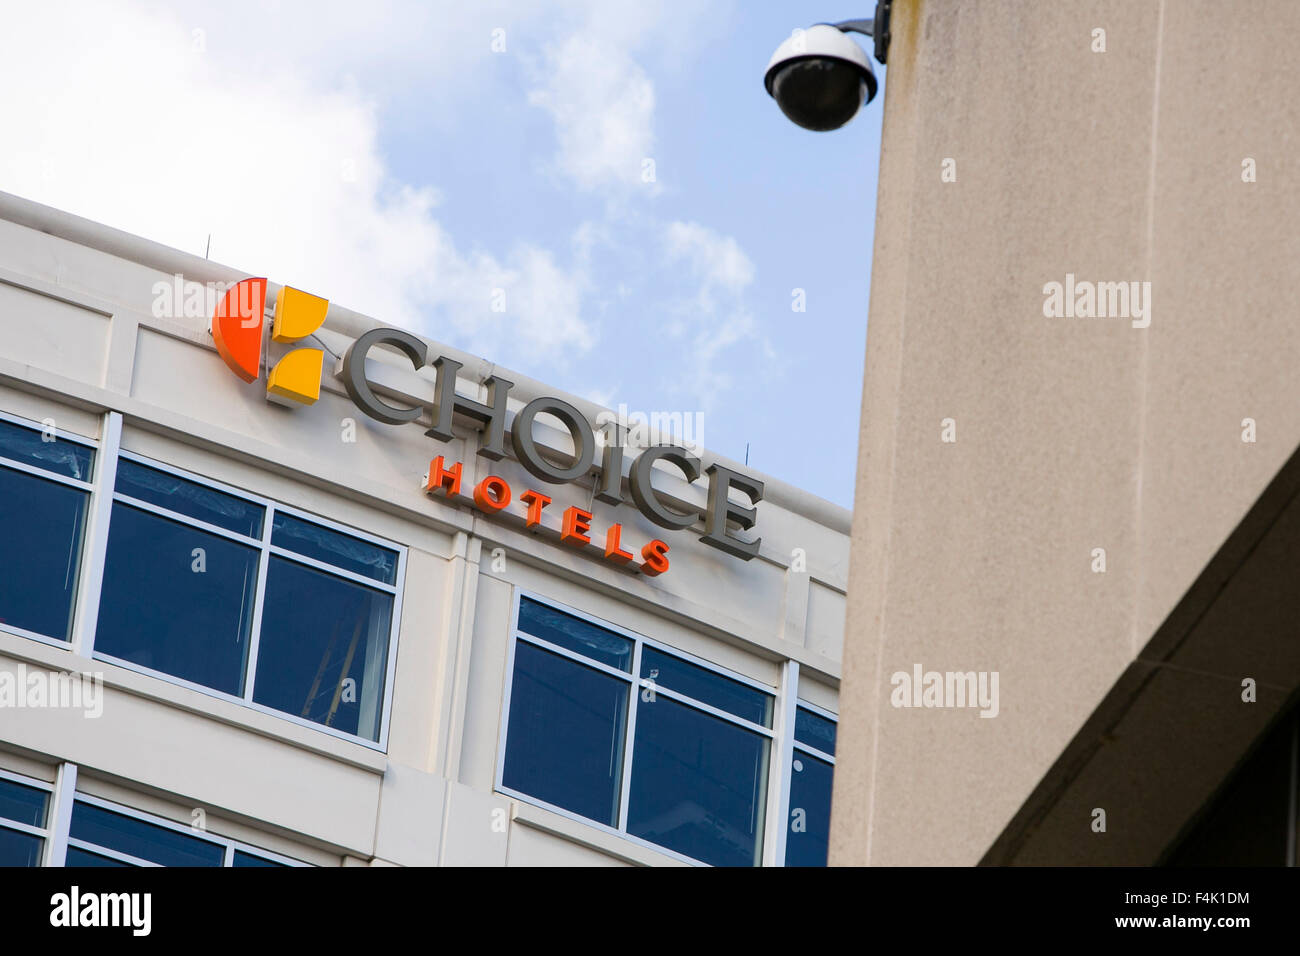 A logo sign outside of the headquarters of Choice Hotels International, Inc. in Rockville, Maryland on October 18, 2015. Stock Photo